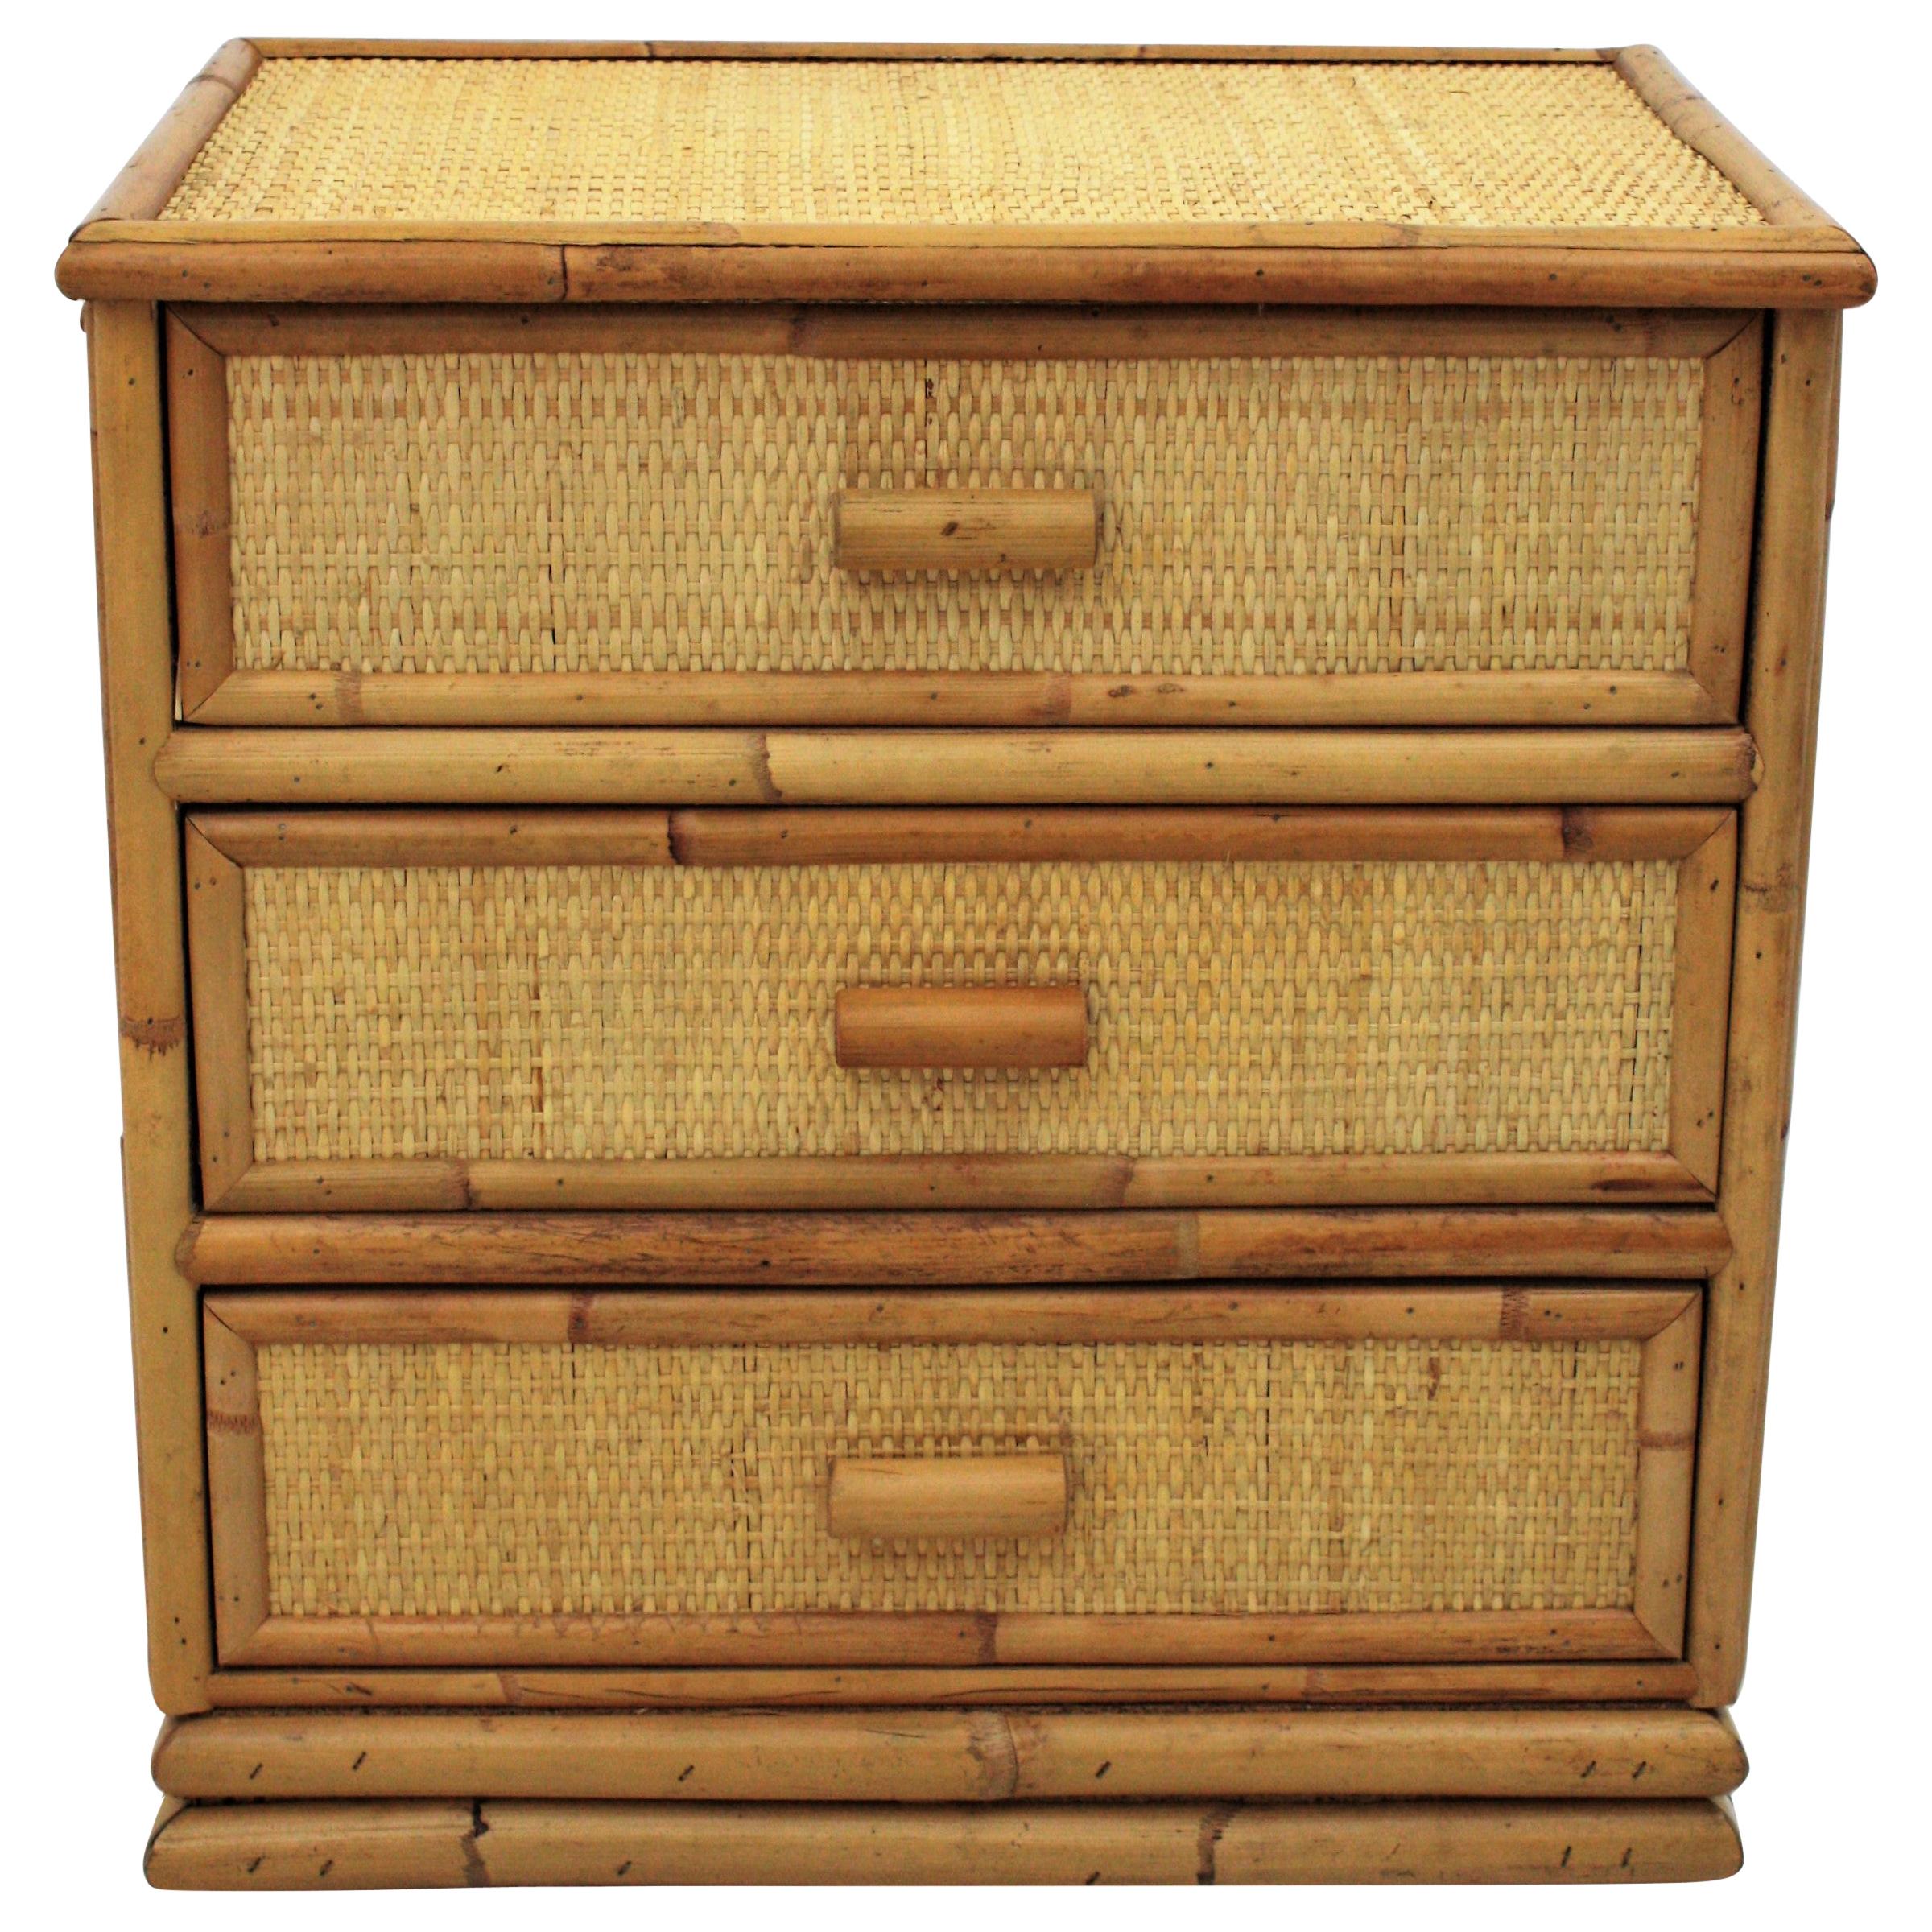 Lovely rattan and bamboo small chest, end table or nightstand, Spain, 1970s.
This small chest of drawers has a wood and bamboo construction. The top, sides and the front part of the drawers are upholstered with woven rattan / wicker. It has bamboo